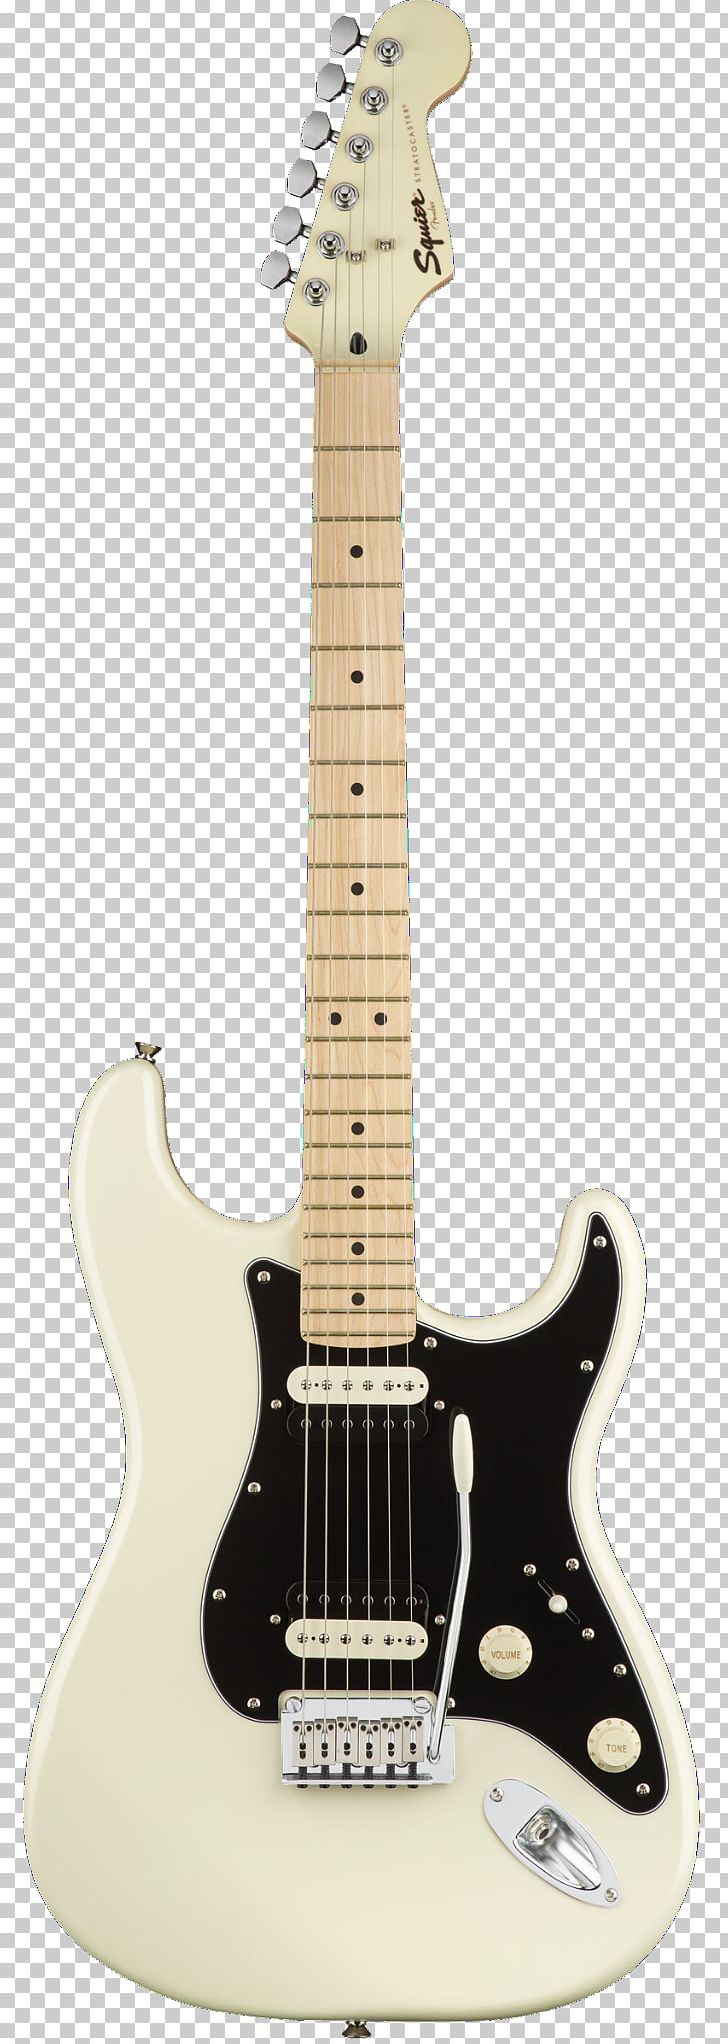 Fender Stratocaster Fender Contemporary Stratocaster Japan Squier Deluxe Hot Rails Stratocaster Fender Telecaster Squier Telecaster PNG, Clipart, Acoustic Electric Guitar, Bass, Guitar Accessory, Headstock, Musical Instrument Free PNG Download